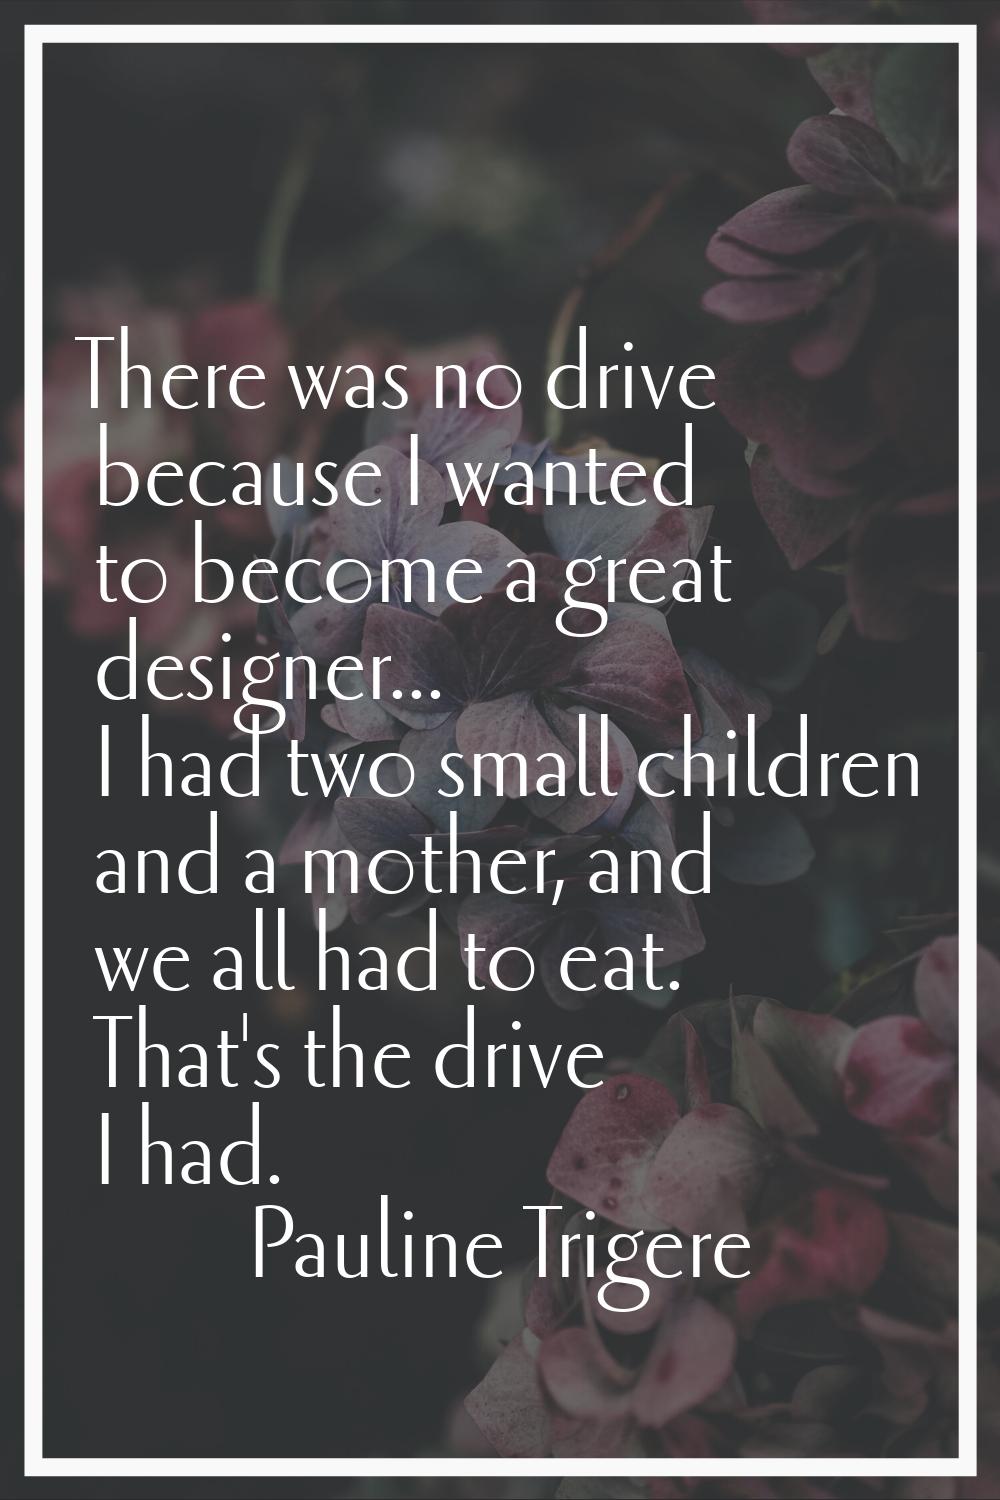 There was no drive because I wanted to become a great designer... I had two small children and a mo